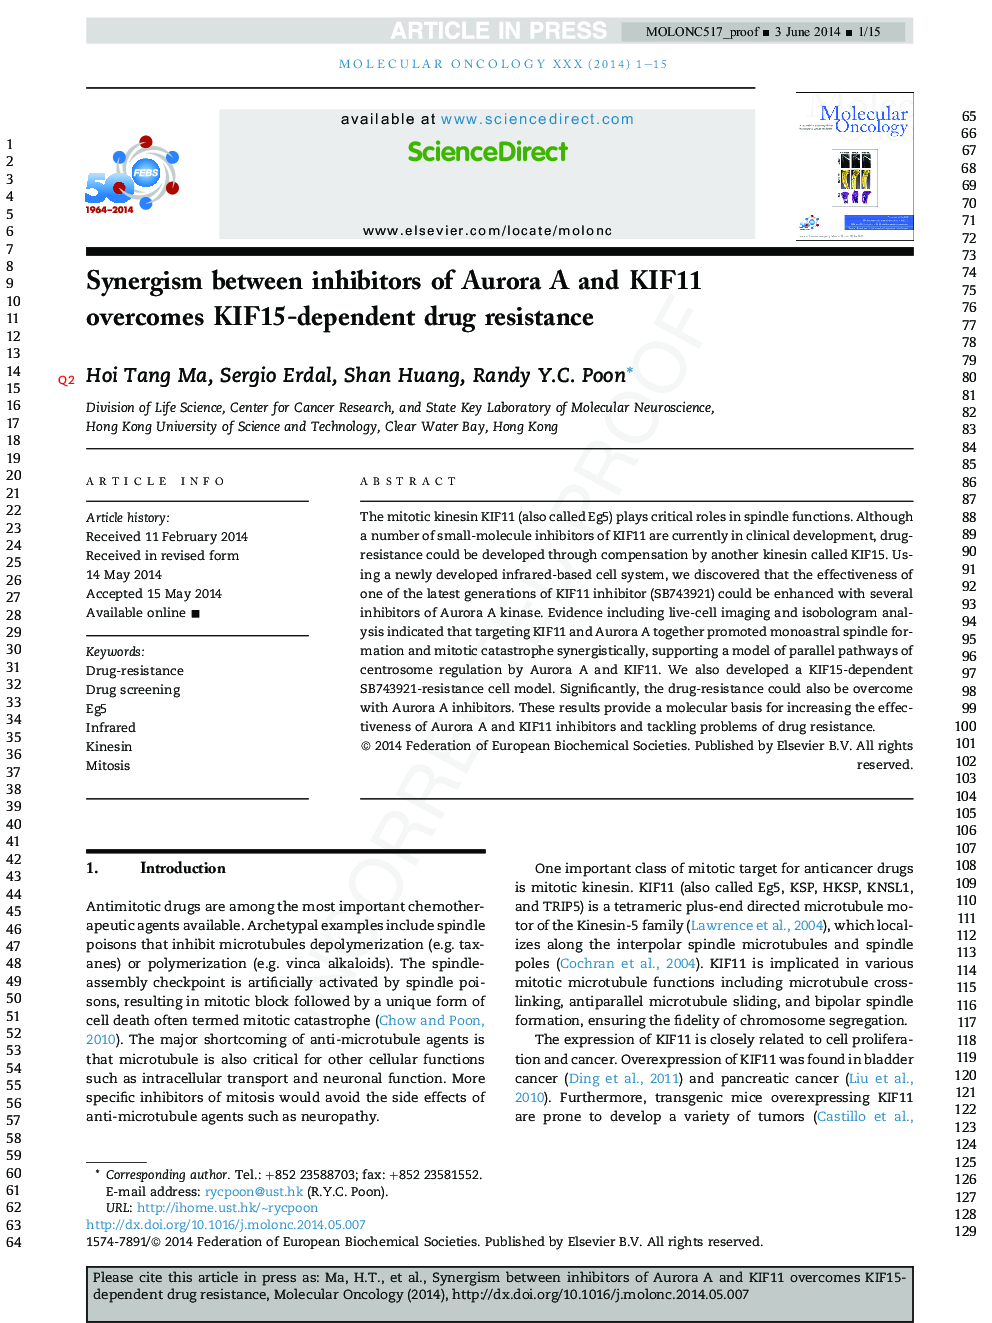 Synergism between inhibitors of Aurora A and KIF11 overcomes KIF15-dependent drug resistance